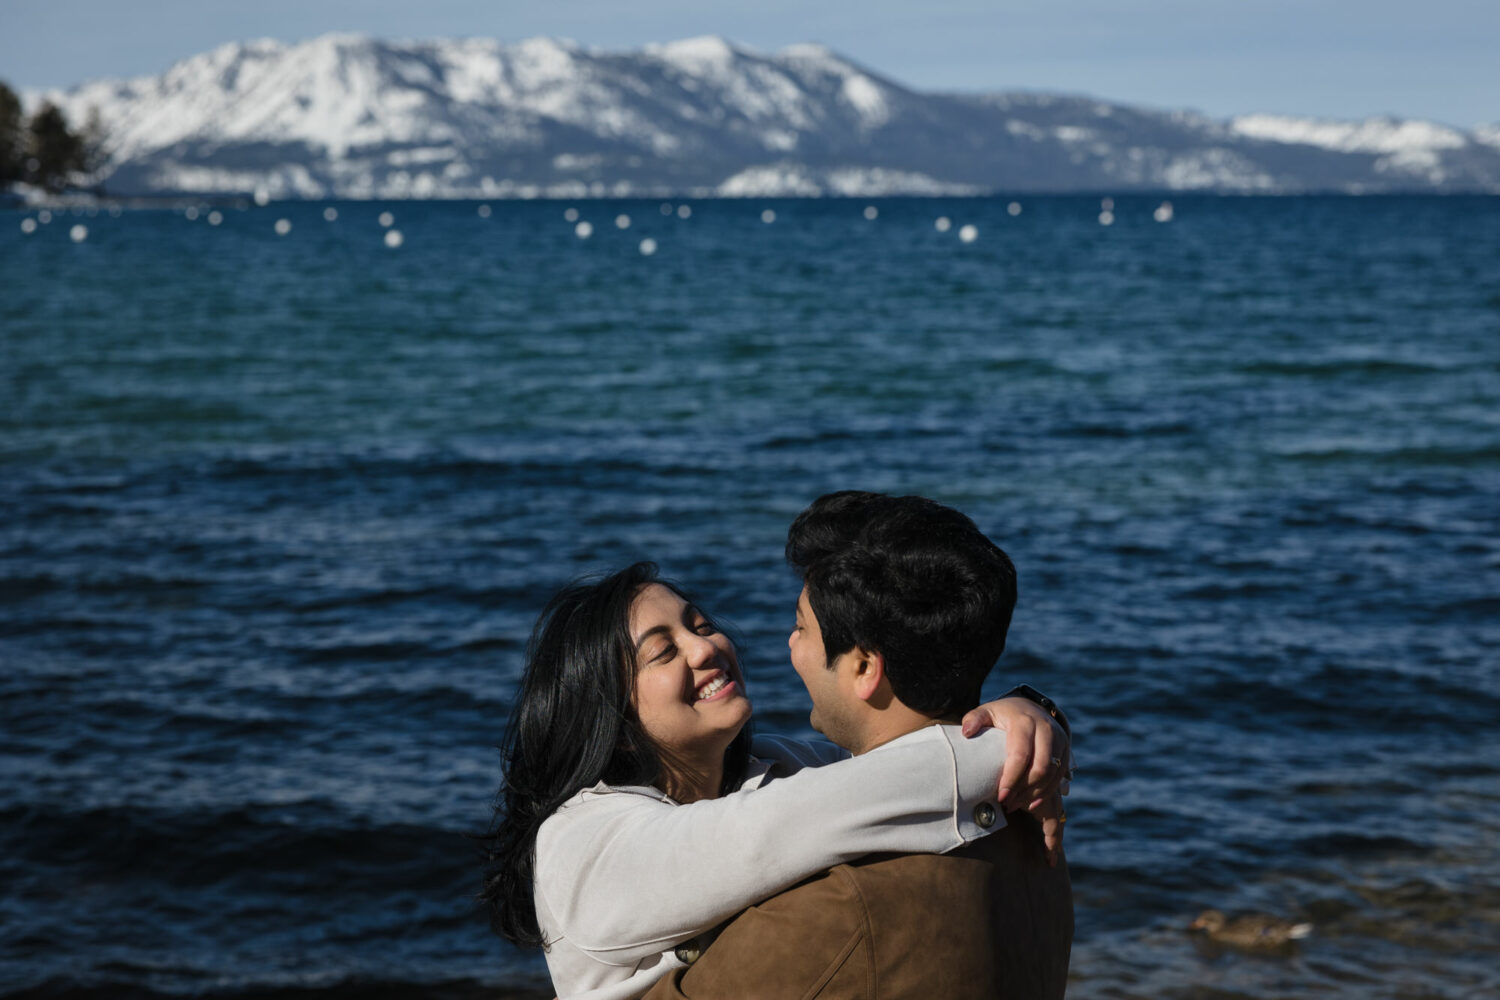 A couple enjoys a private engagement photoshoot in Tahoe during winter.